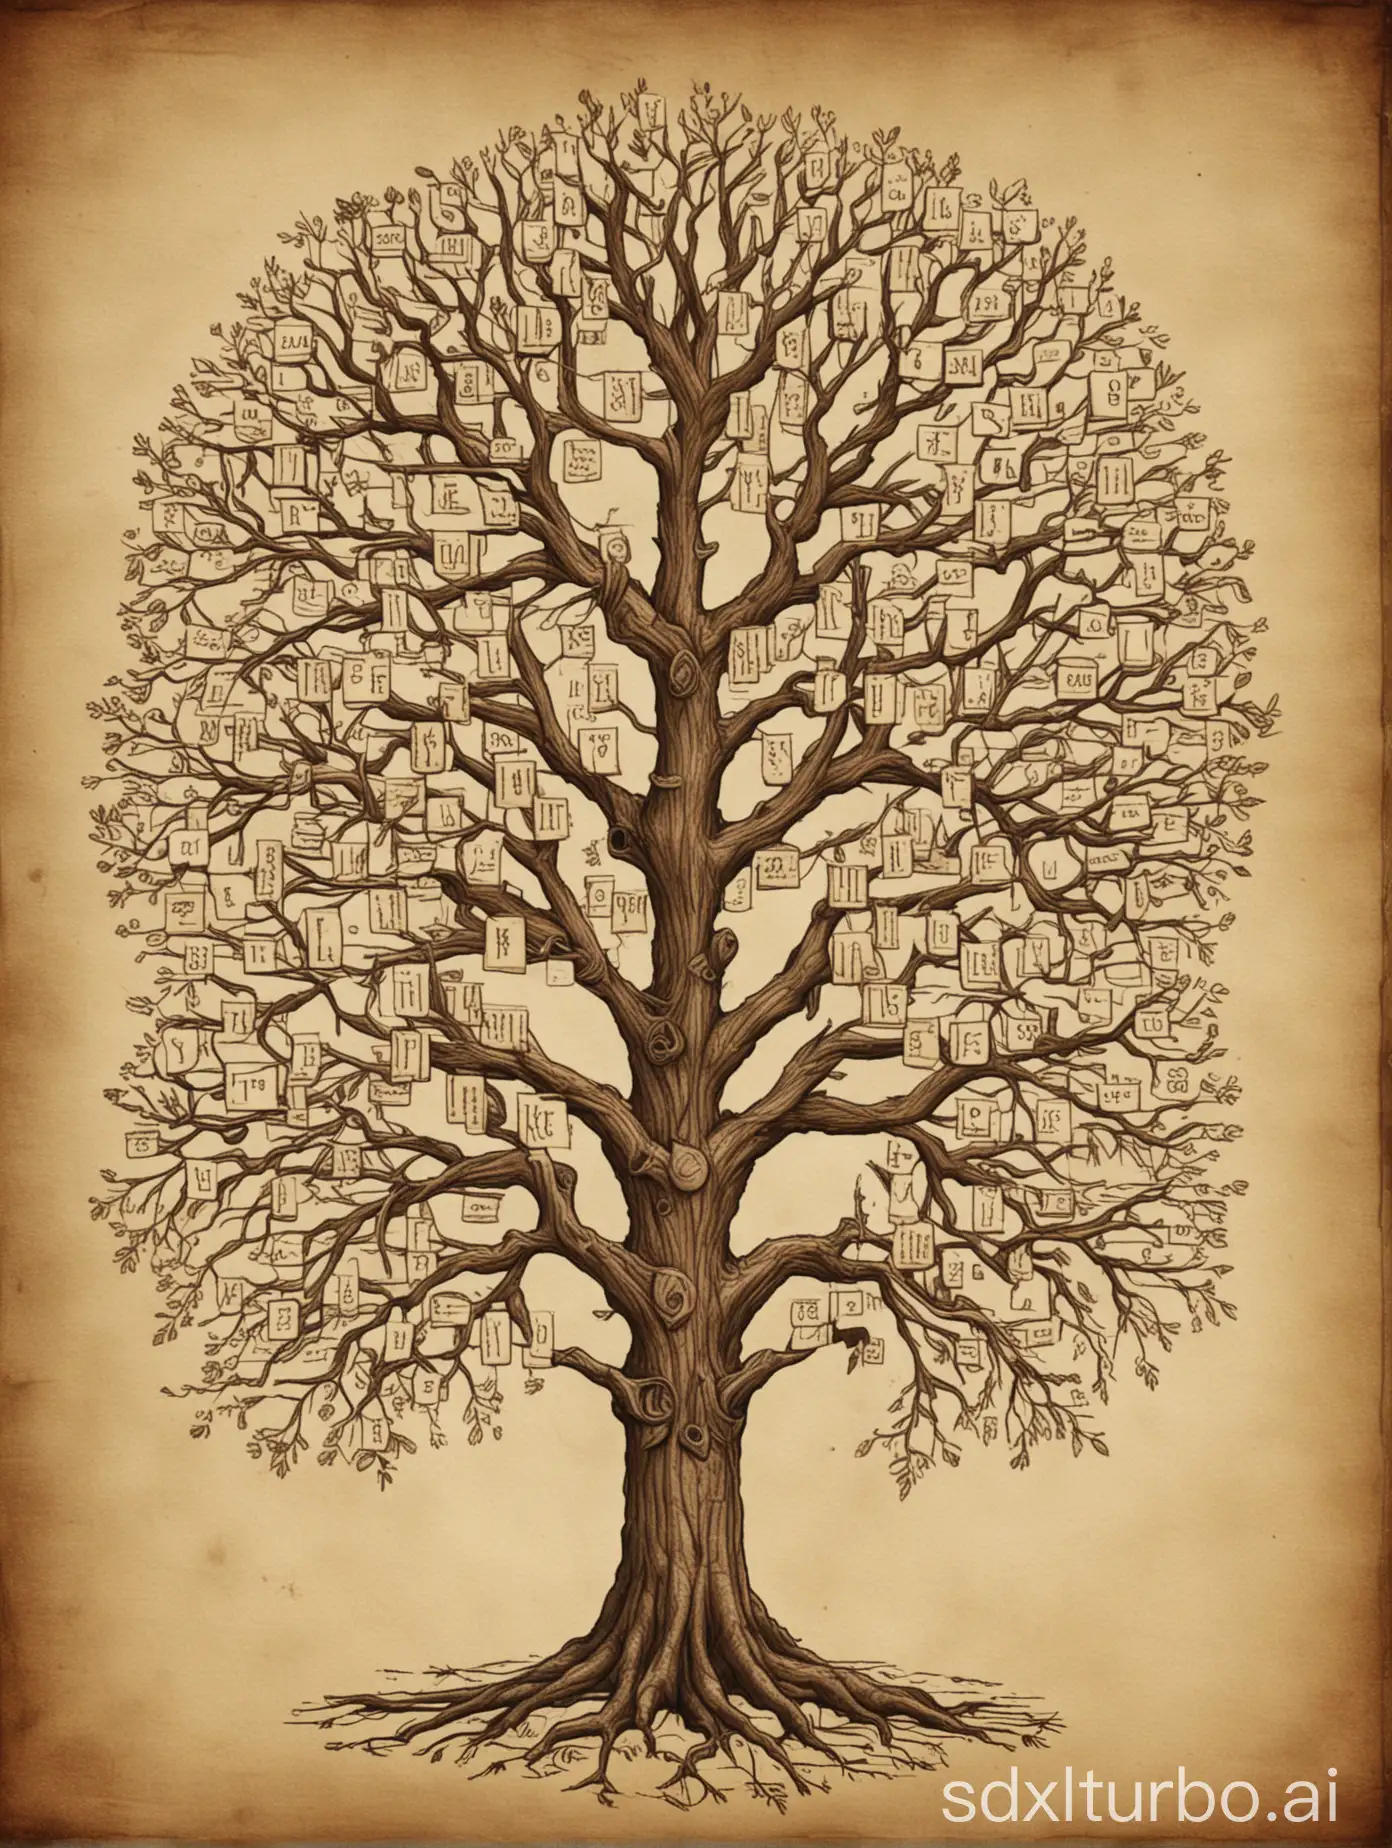 Skill tree, with 10 branches on each side, unadorned with any letters